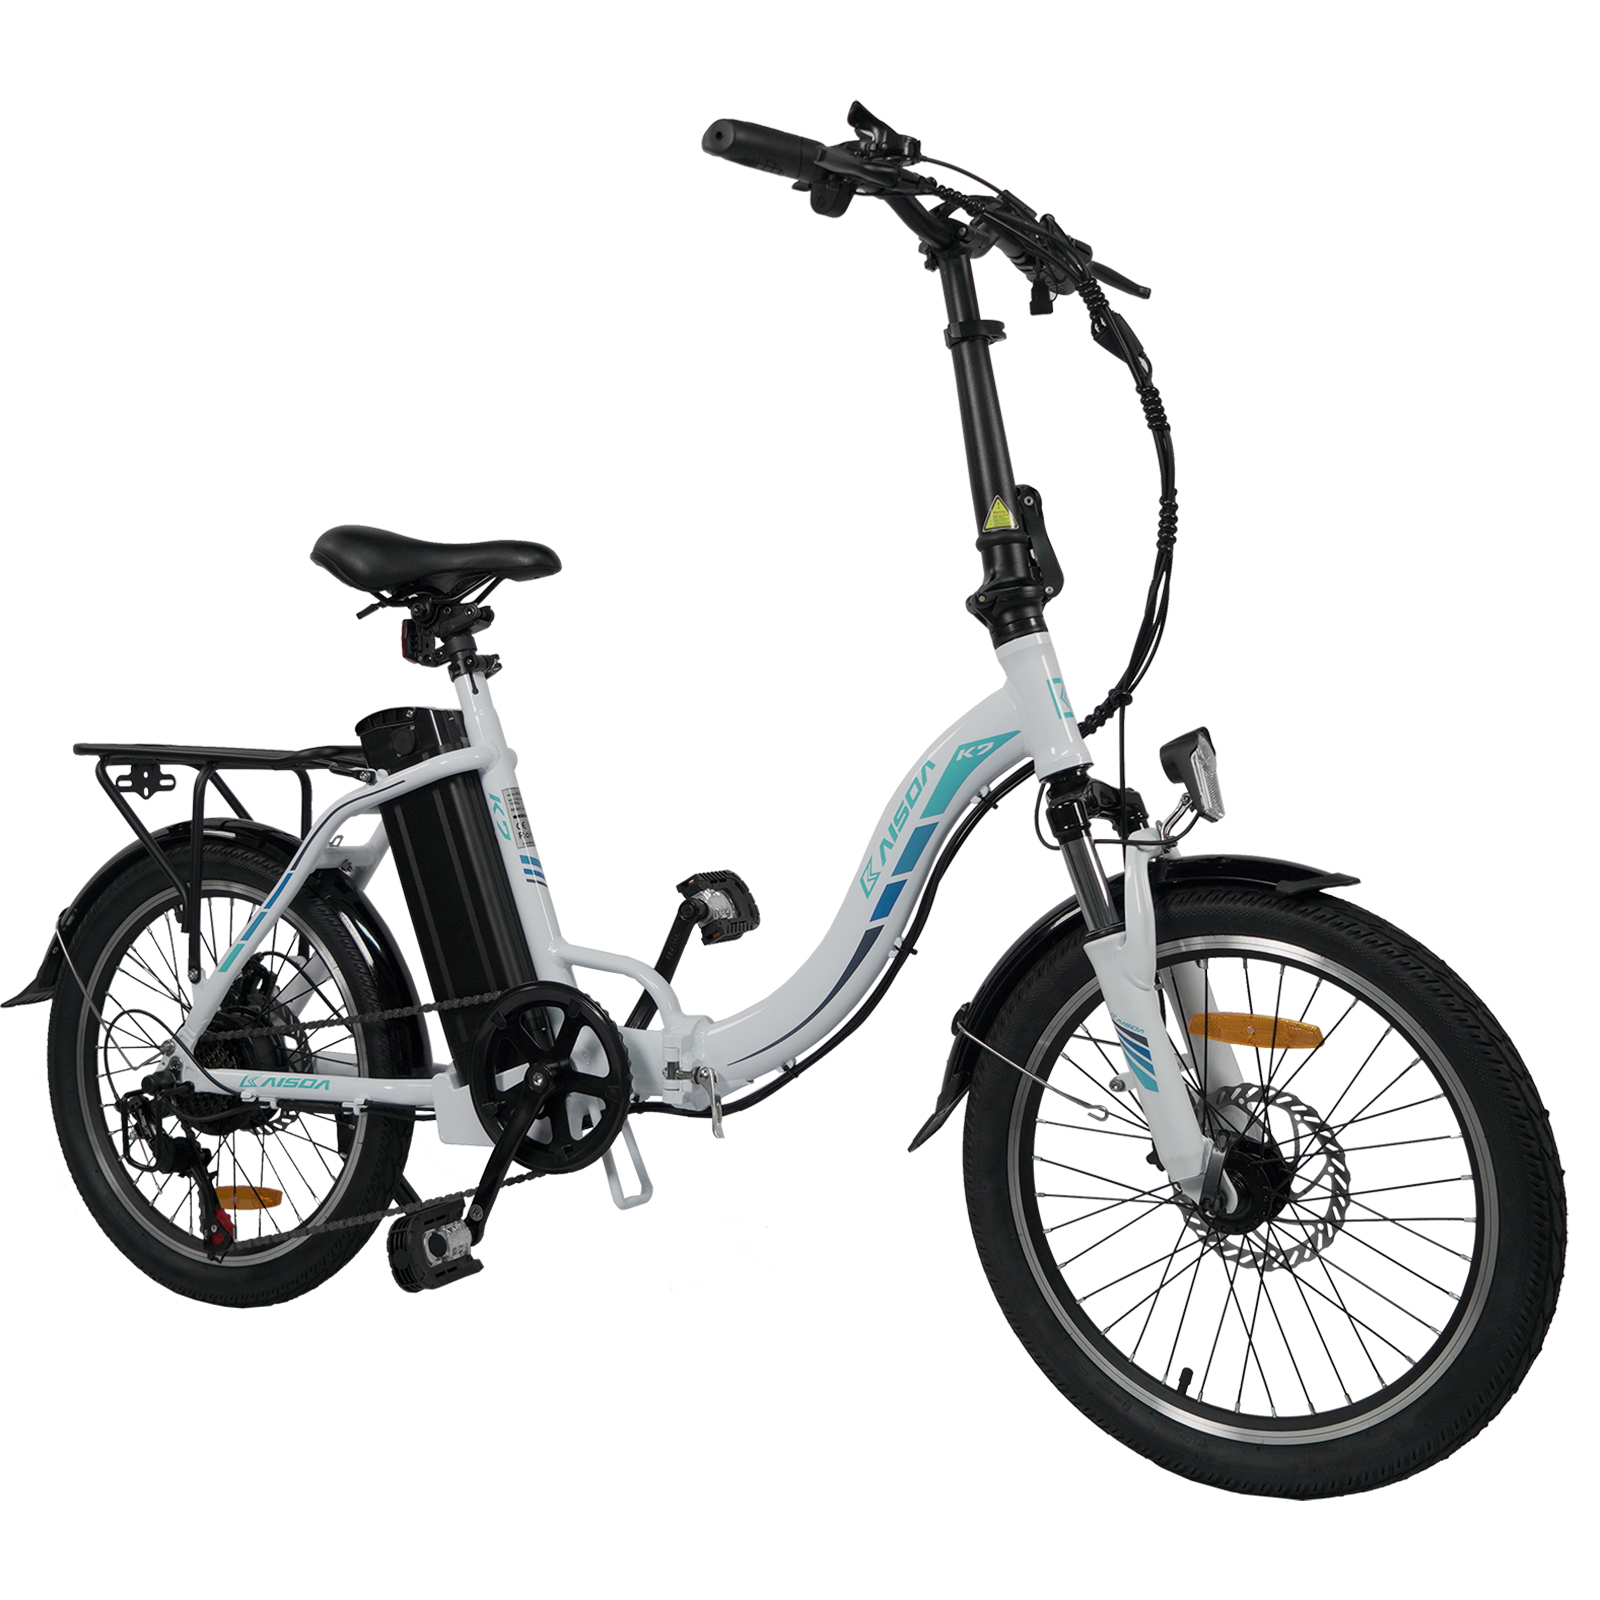 Find EU Direct KAISDA K7 36V 12 5AH 350W 20inch Electric Bicycle Disc Brake 45 75KM Mileage 120KG Payload Electric Bike for Sale on Gipsybee.com with cryptocurrencies